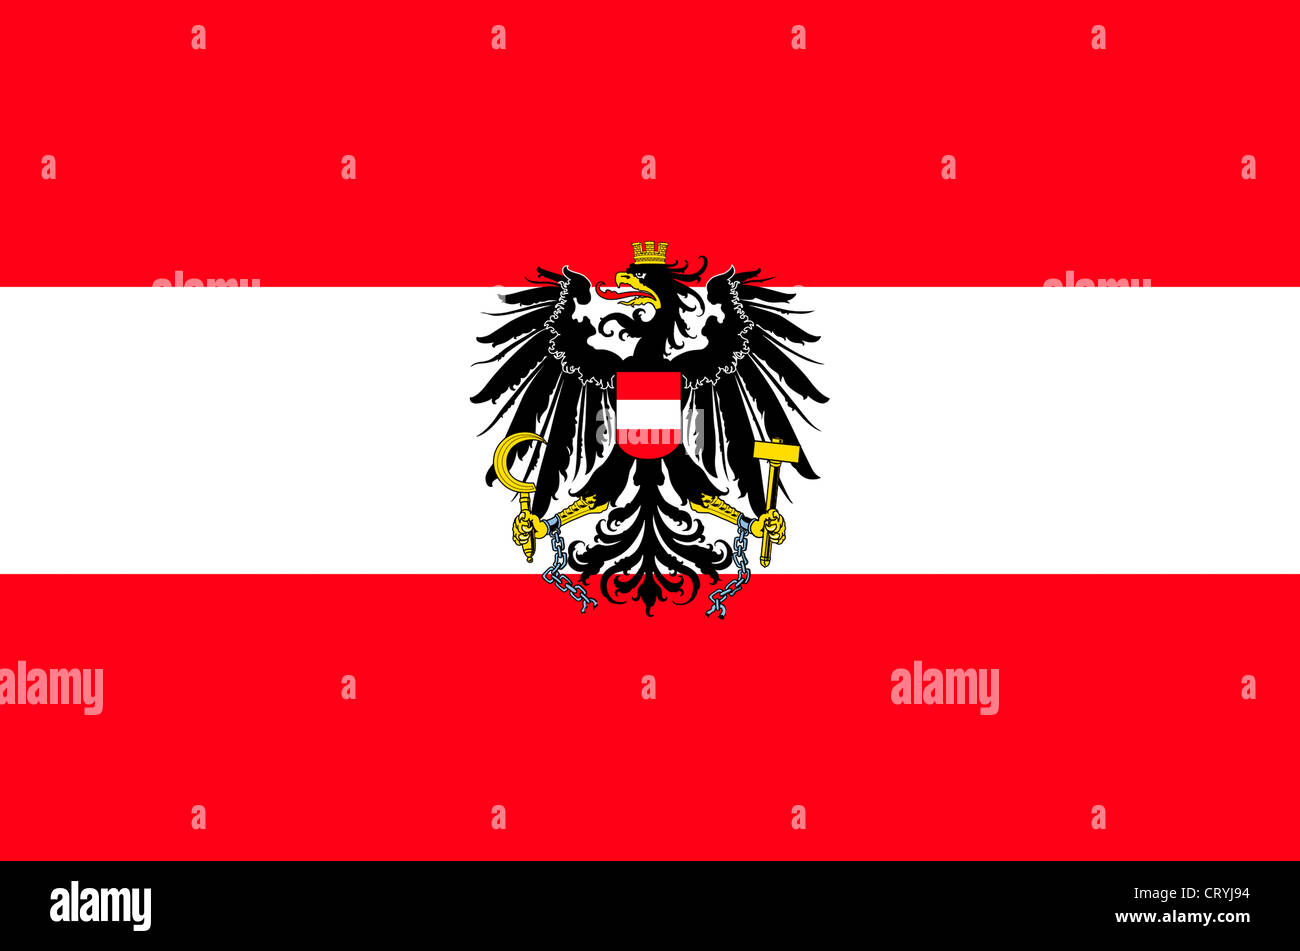 Federal service flag of the Republic of Austria with the national coat of arms. Stock Photo